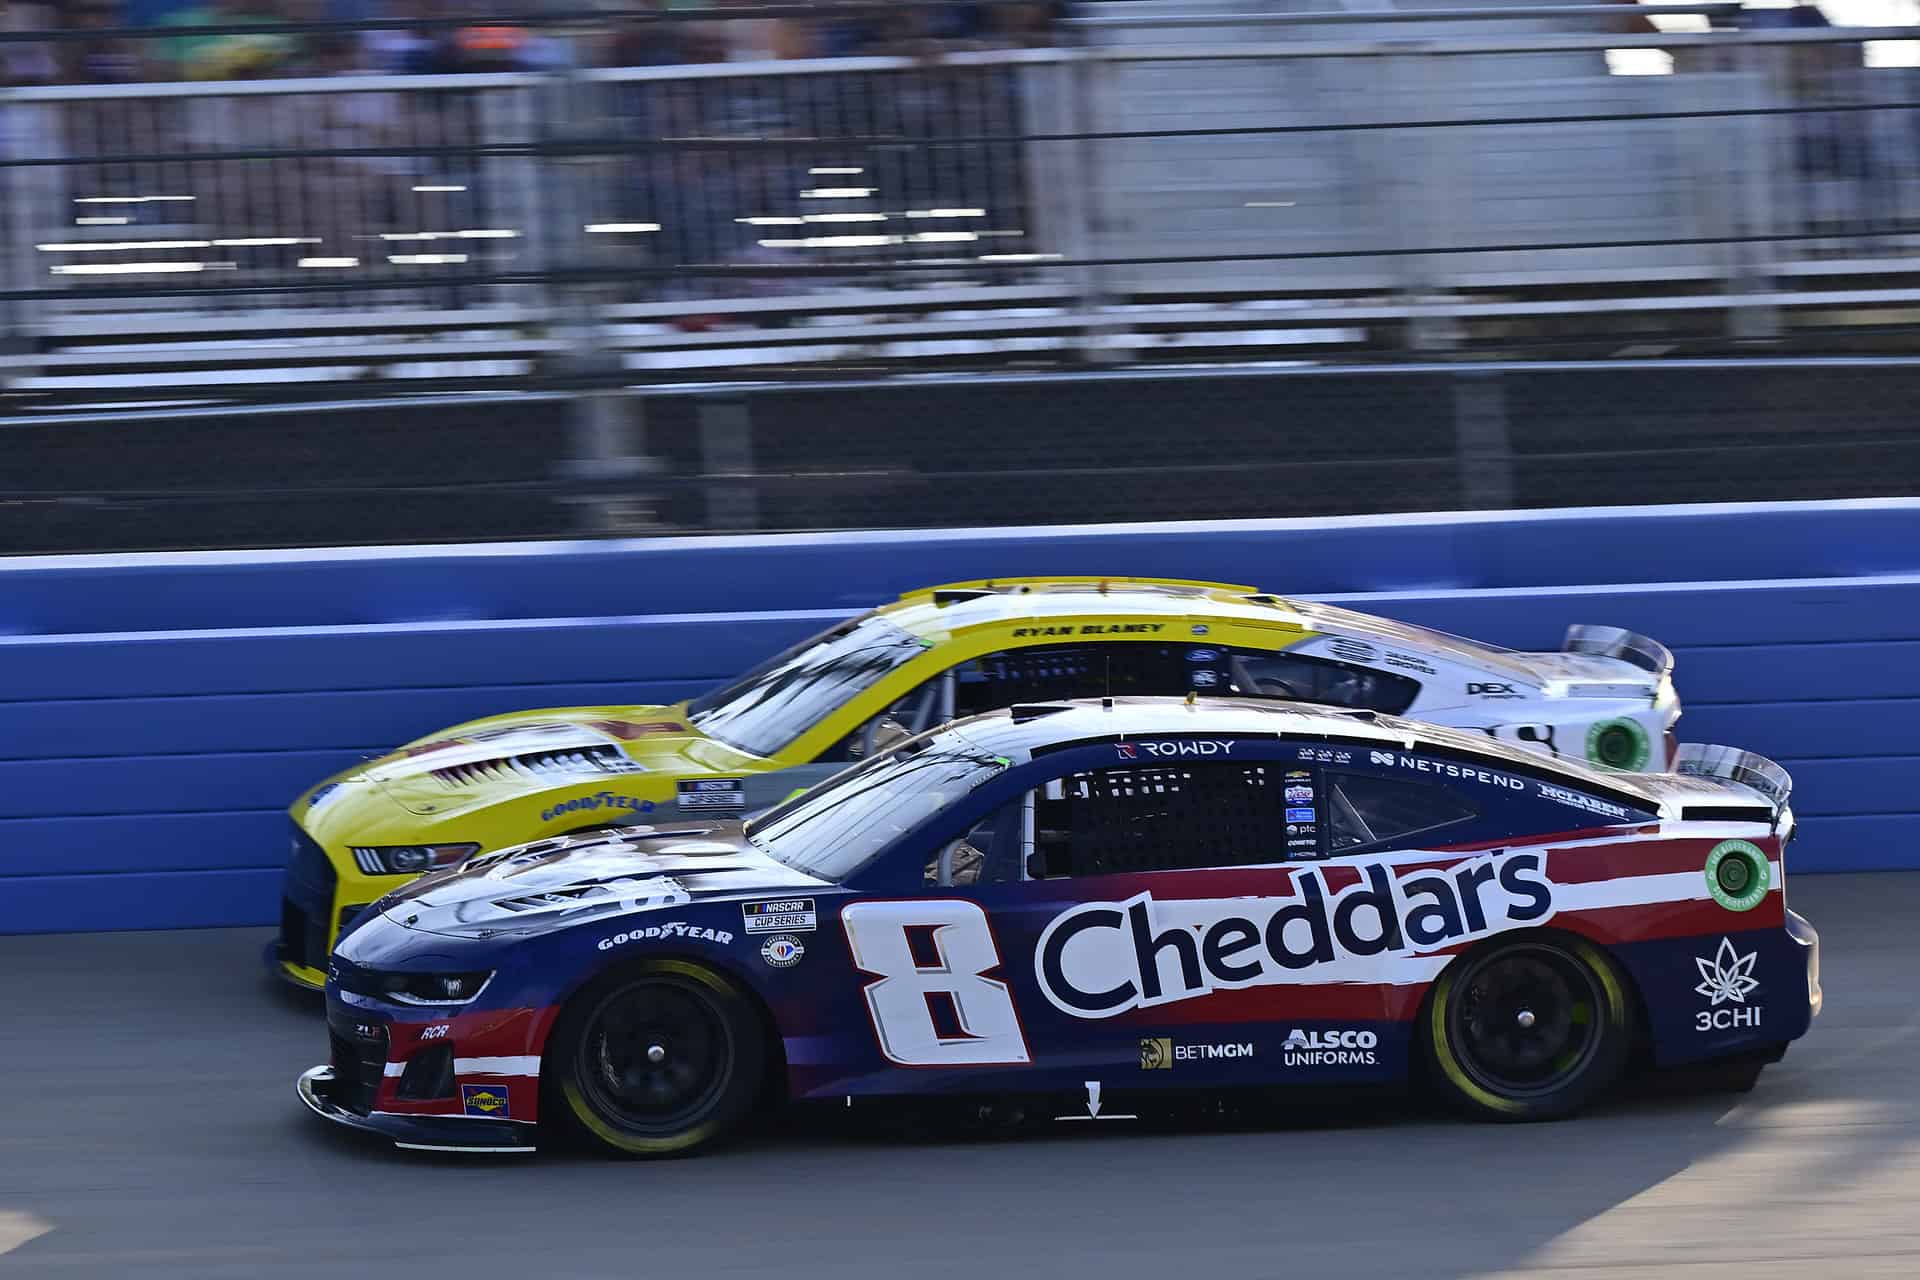 Kyle Busch overcame an early flat tire to a crash and more to score a top-10 finish in the NASCAR Cup Series at Nashville Superspeedway.